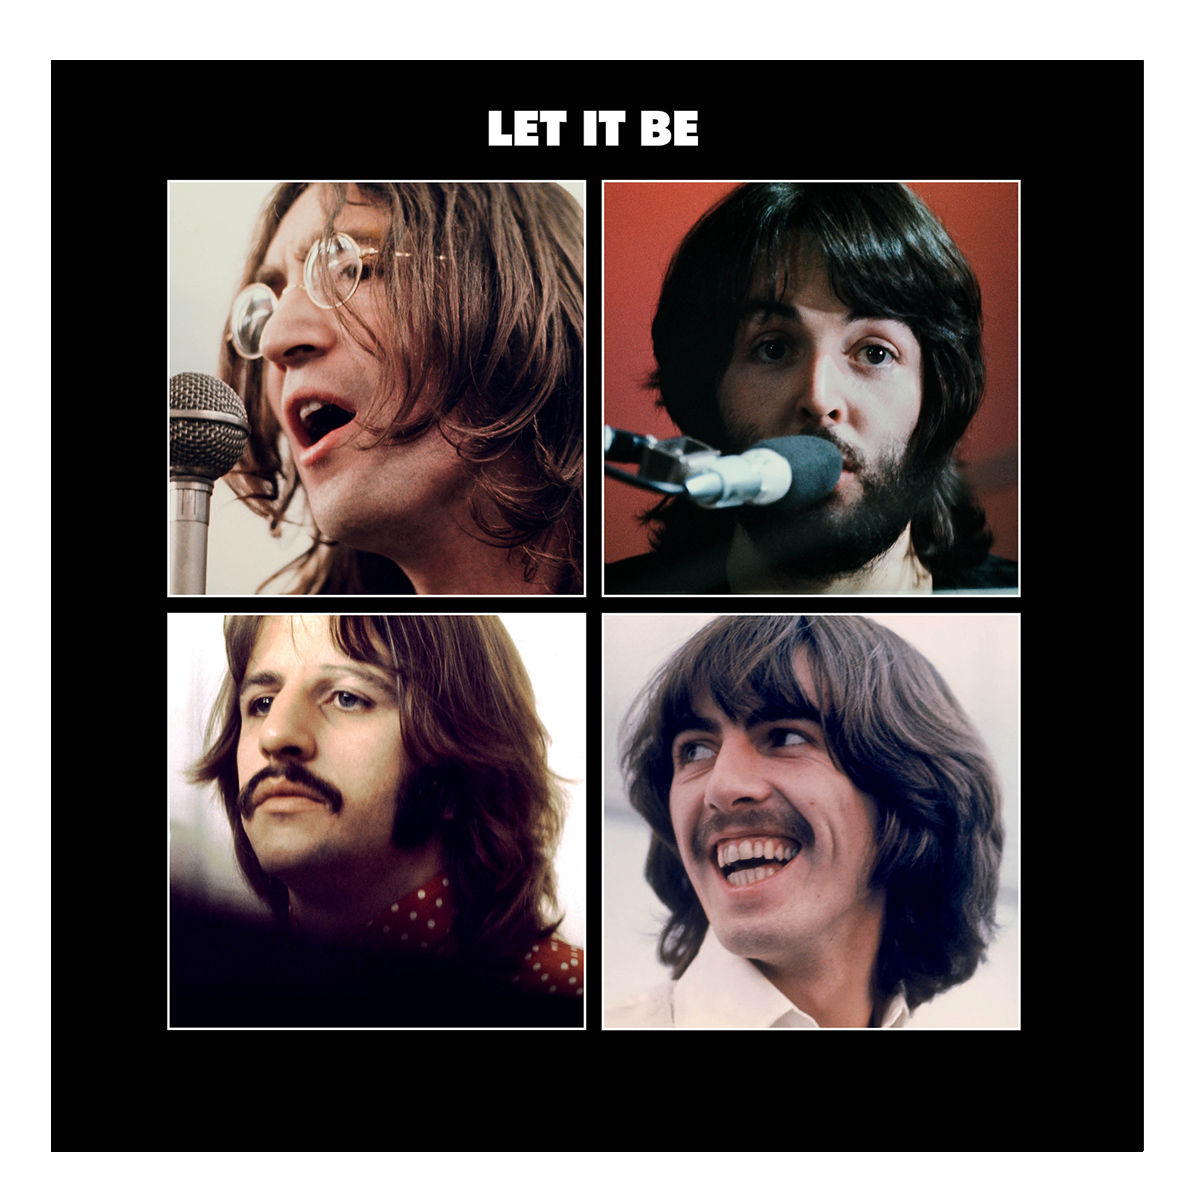 The Beatles - Let It Be – Special Edition (LP)